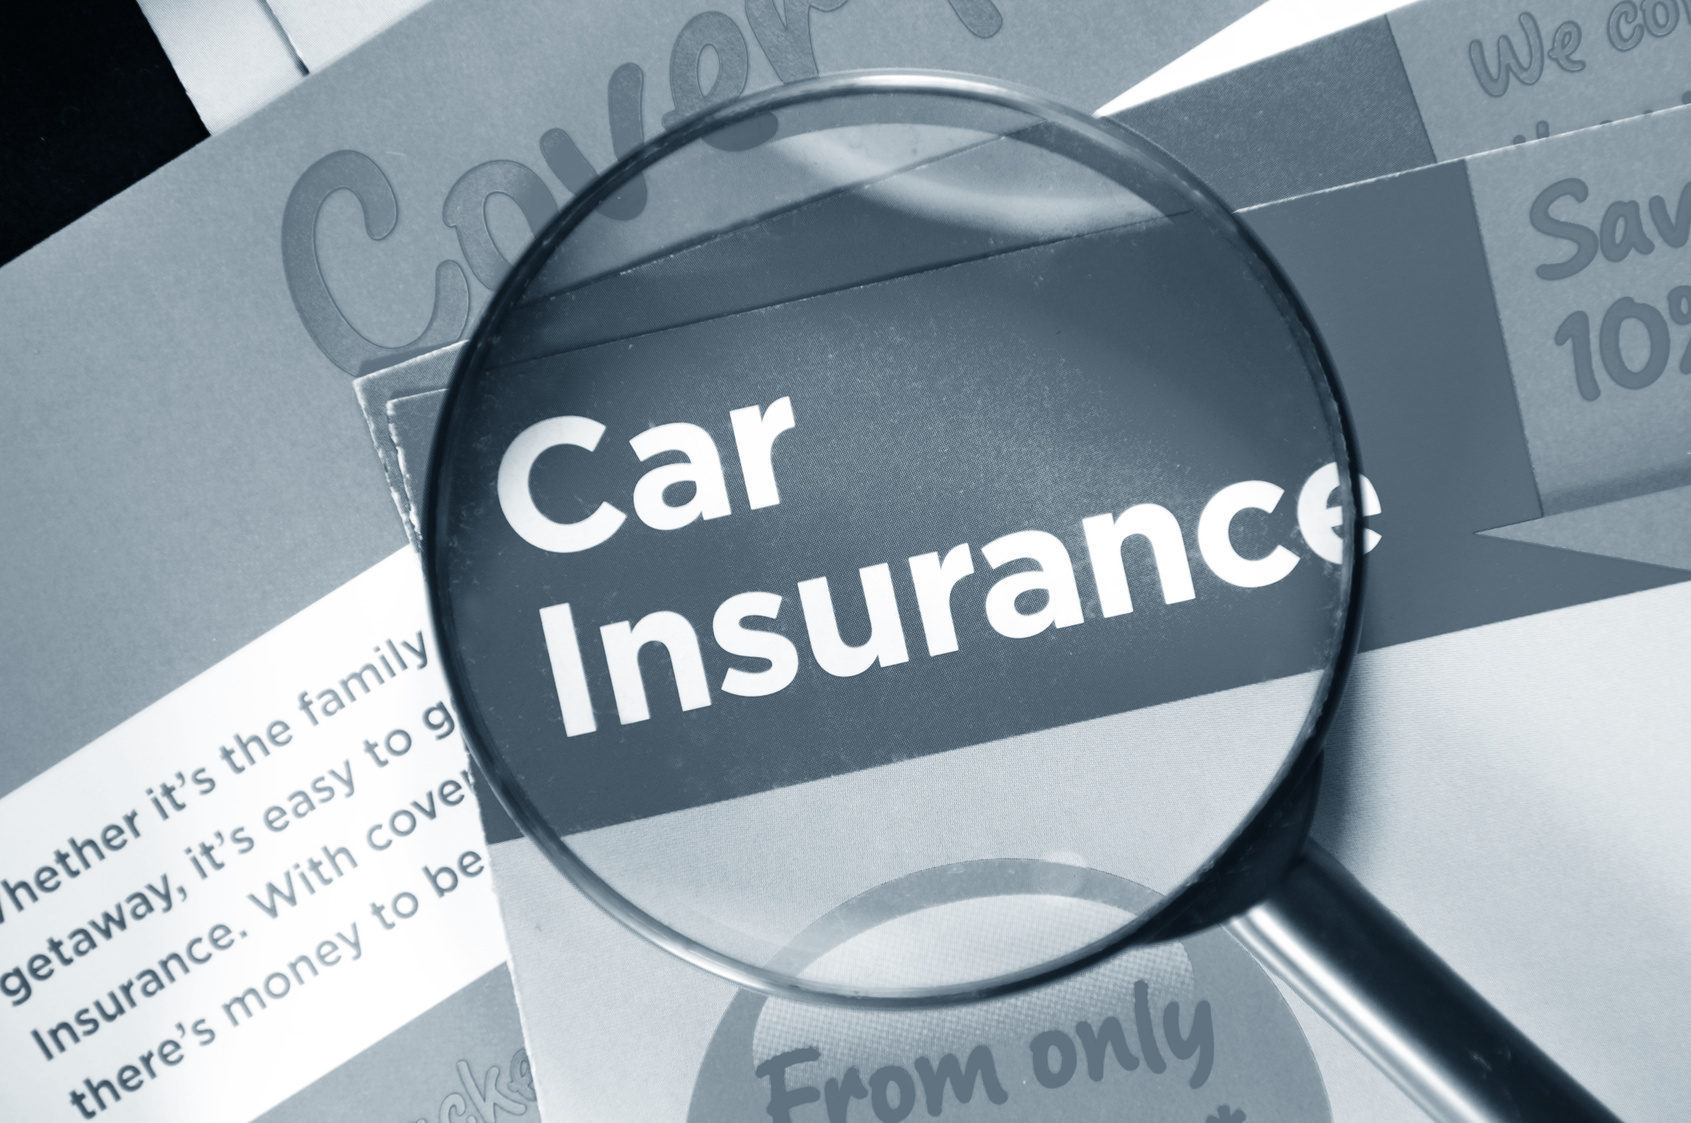 9 Questions You Might Be Afraid to Ask About California Car Insurance Rates